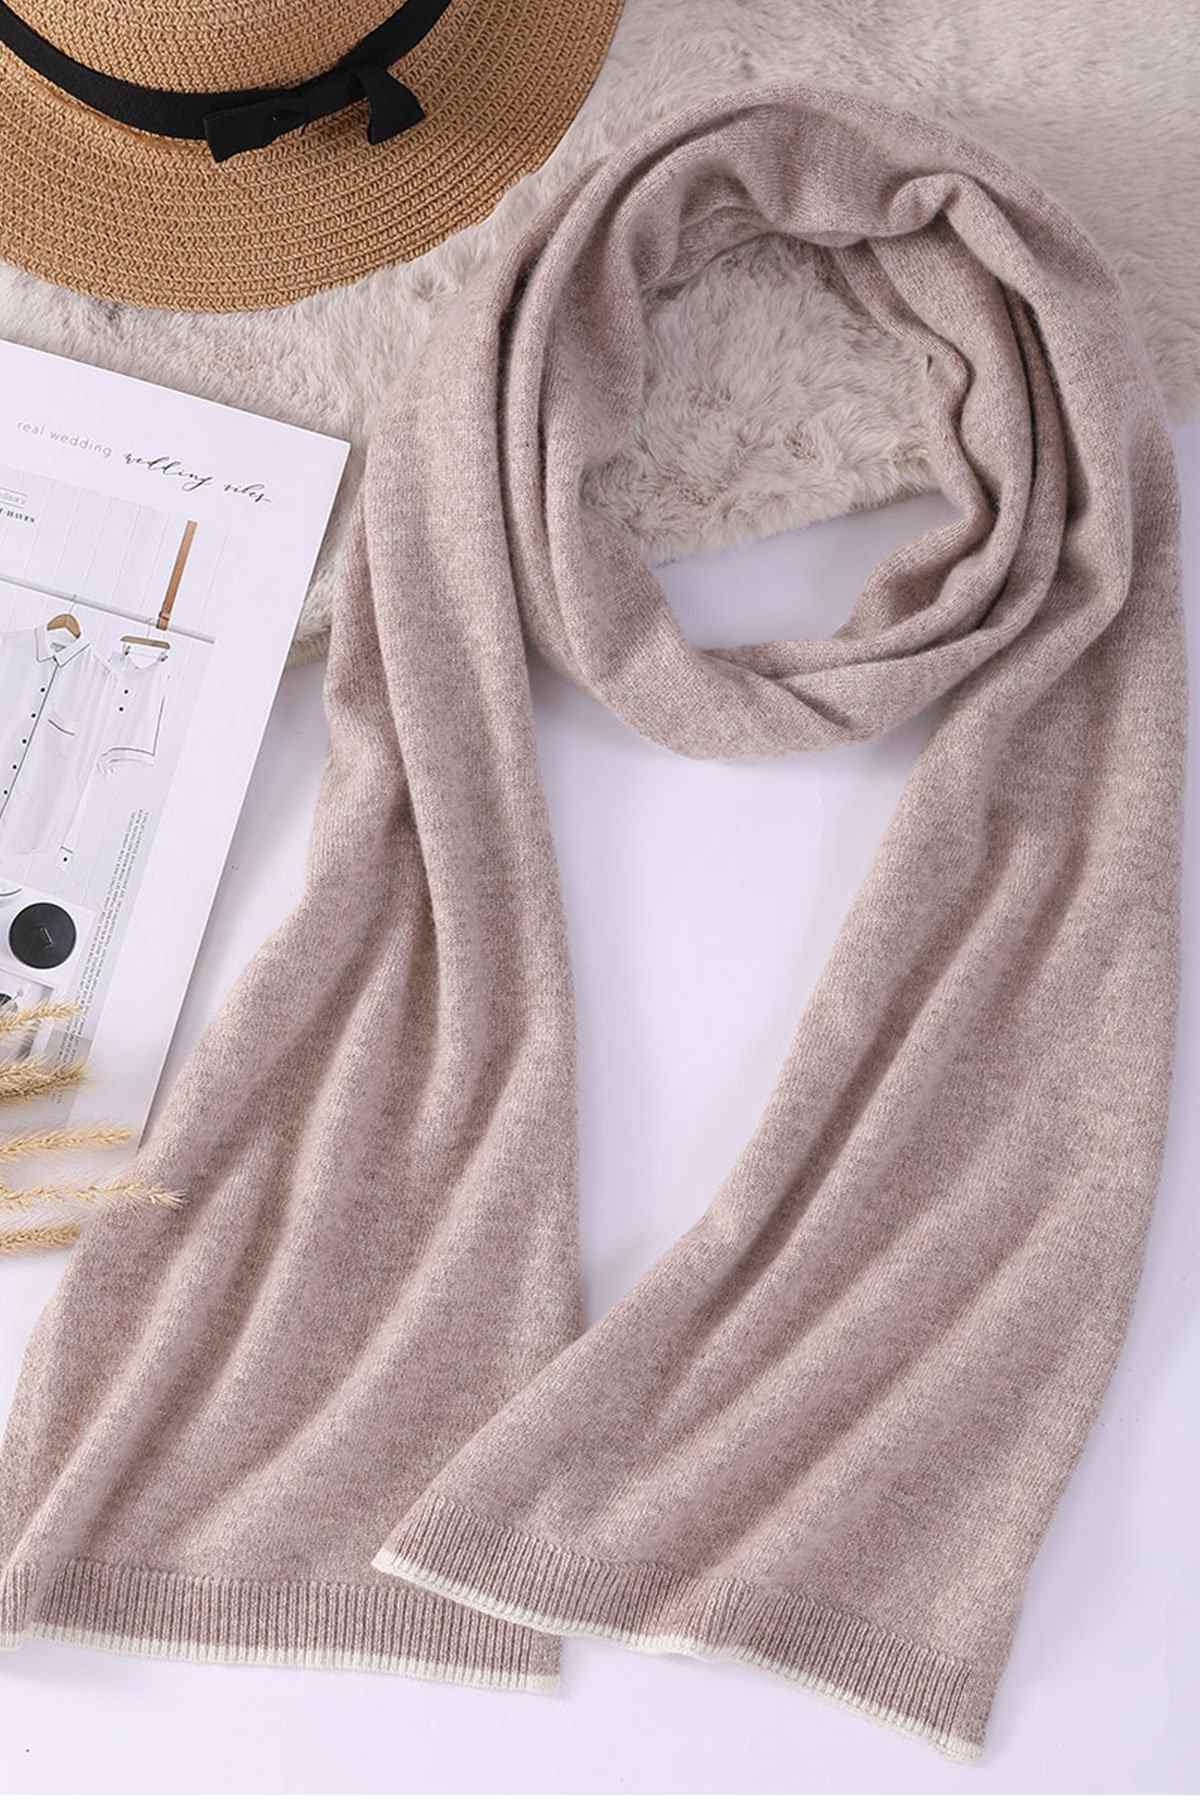 Why do you need a cashmere scarf from EWSCA?